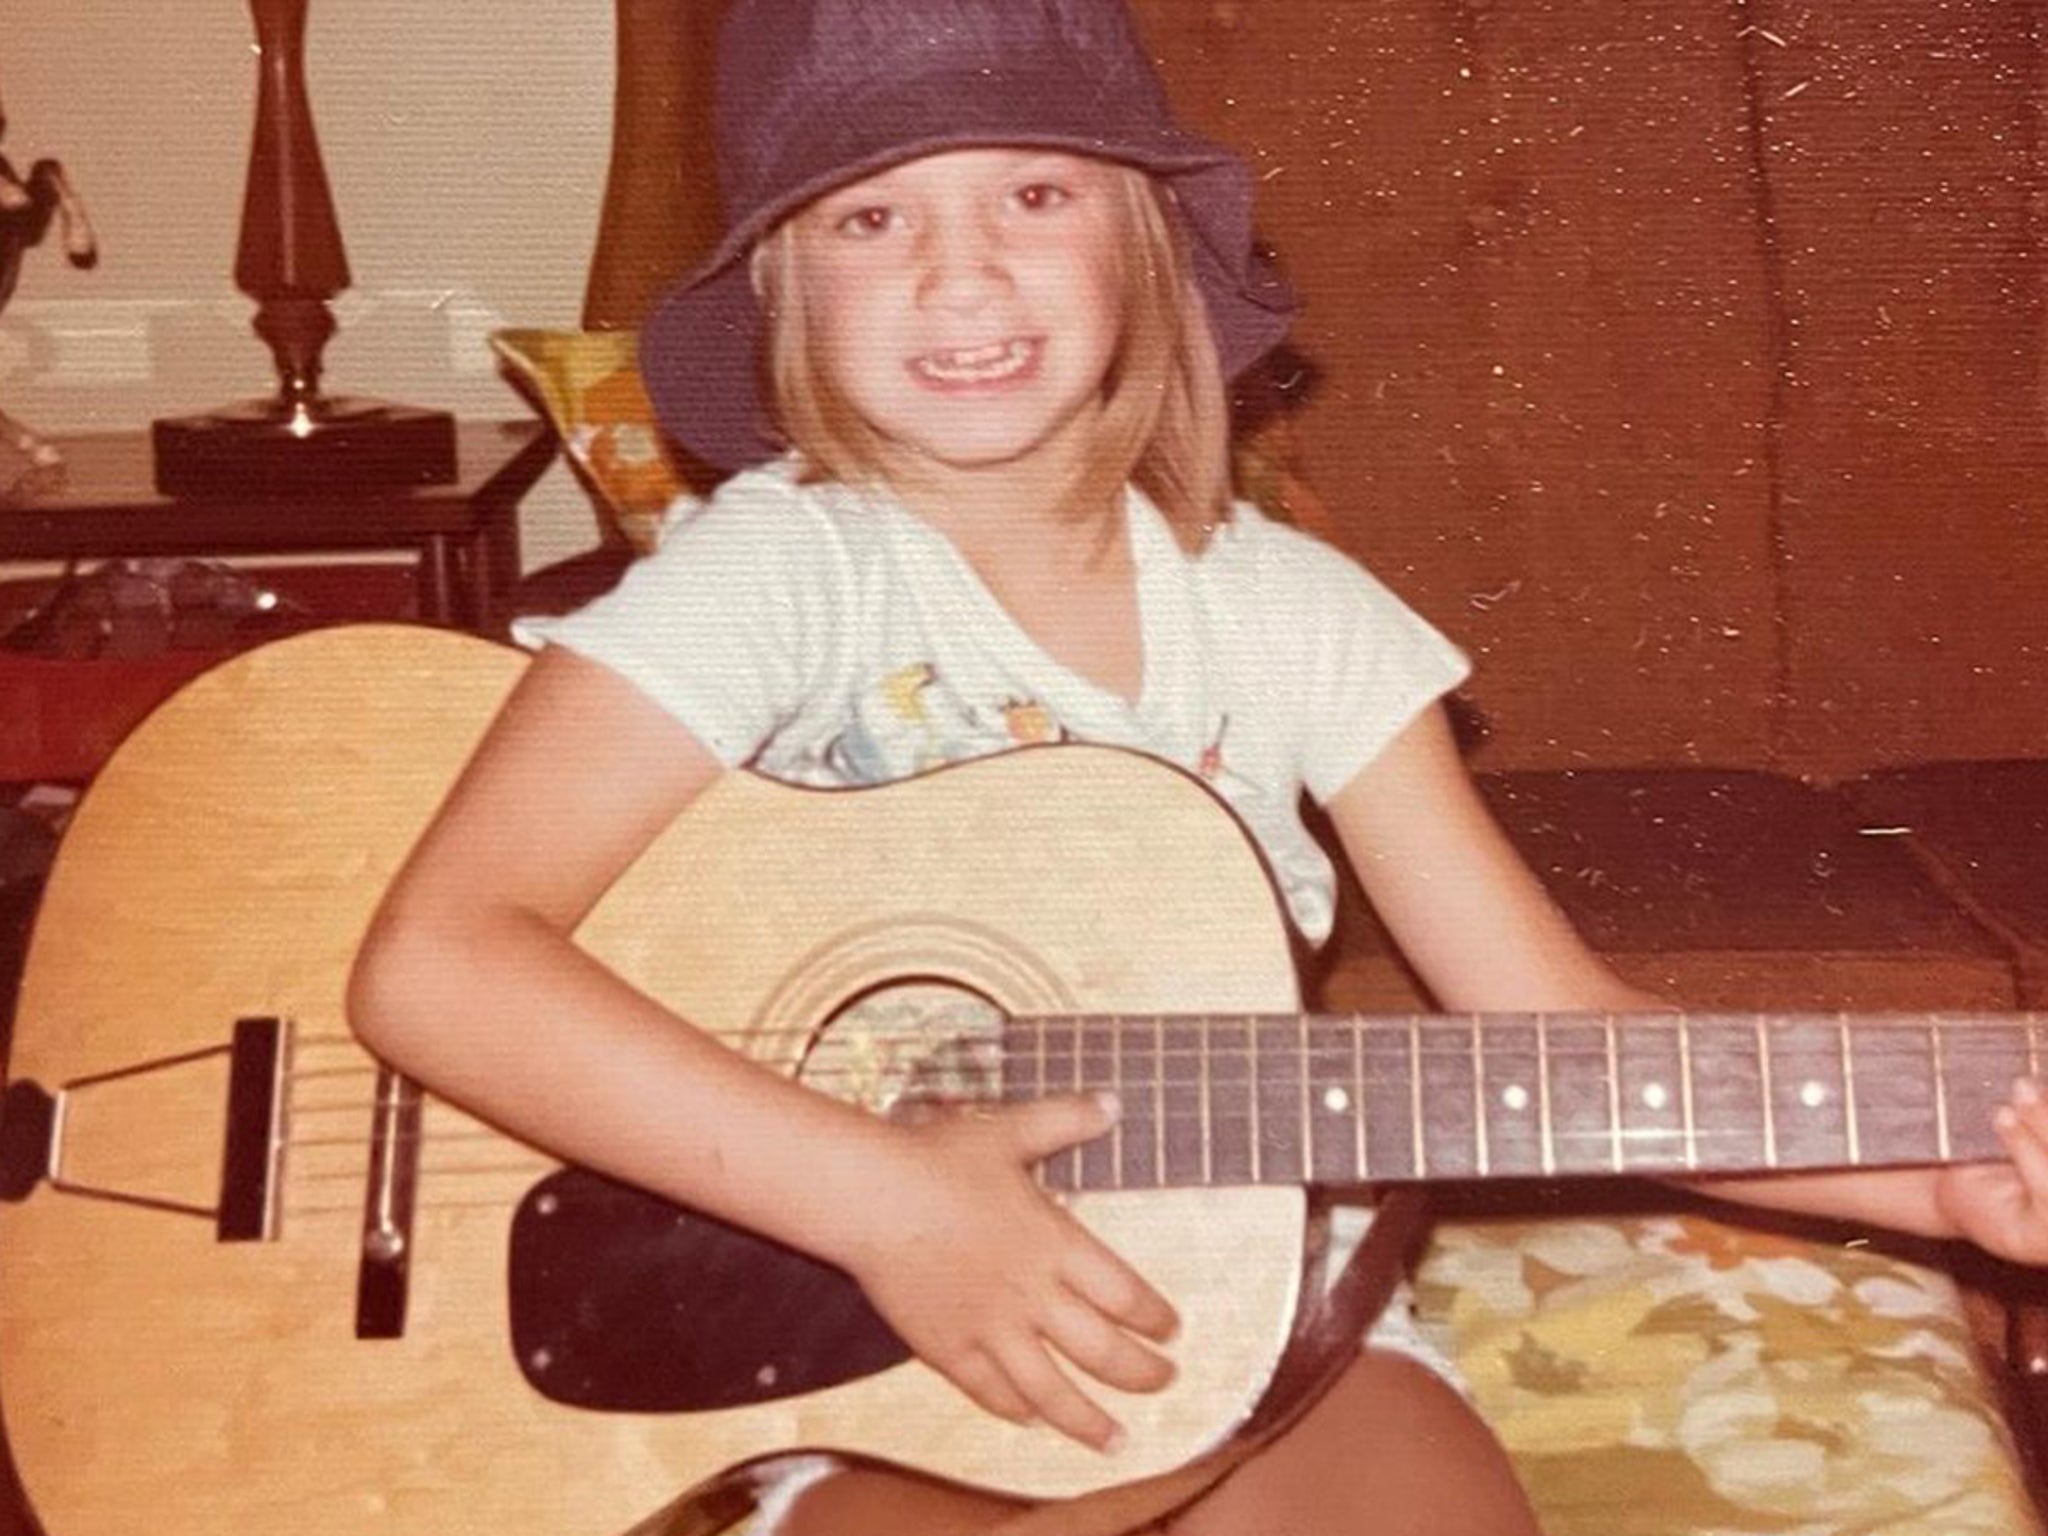 Guess Who This Mini Guitarist Turned Into! - TMZ (Picture 1)